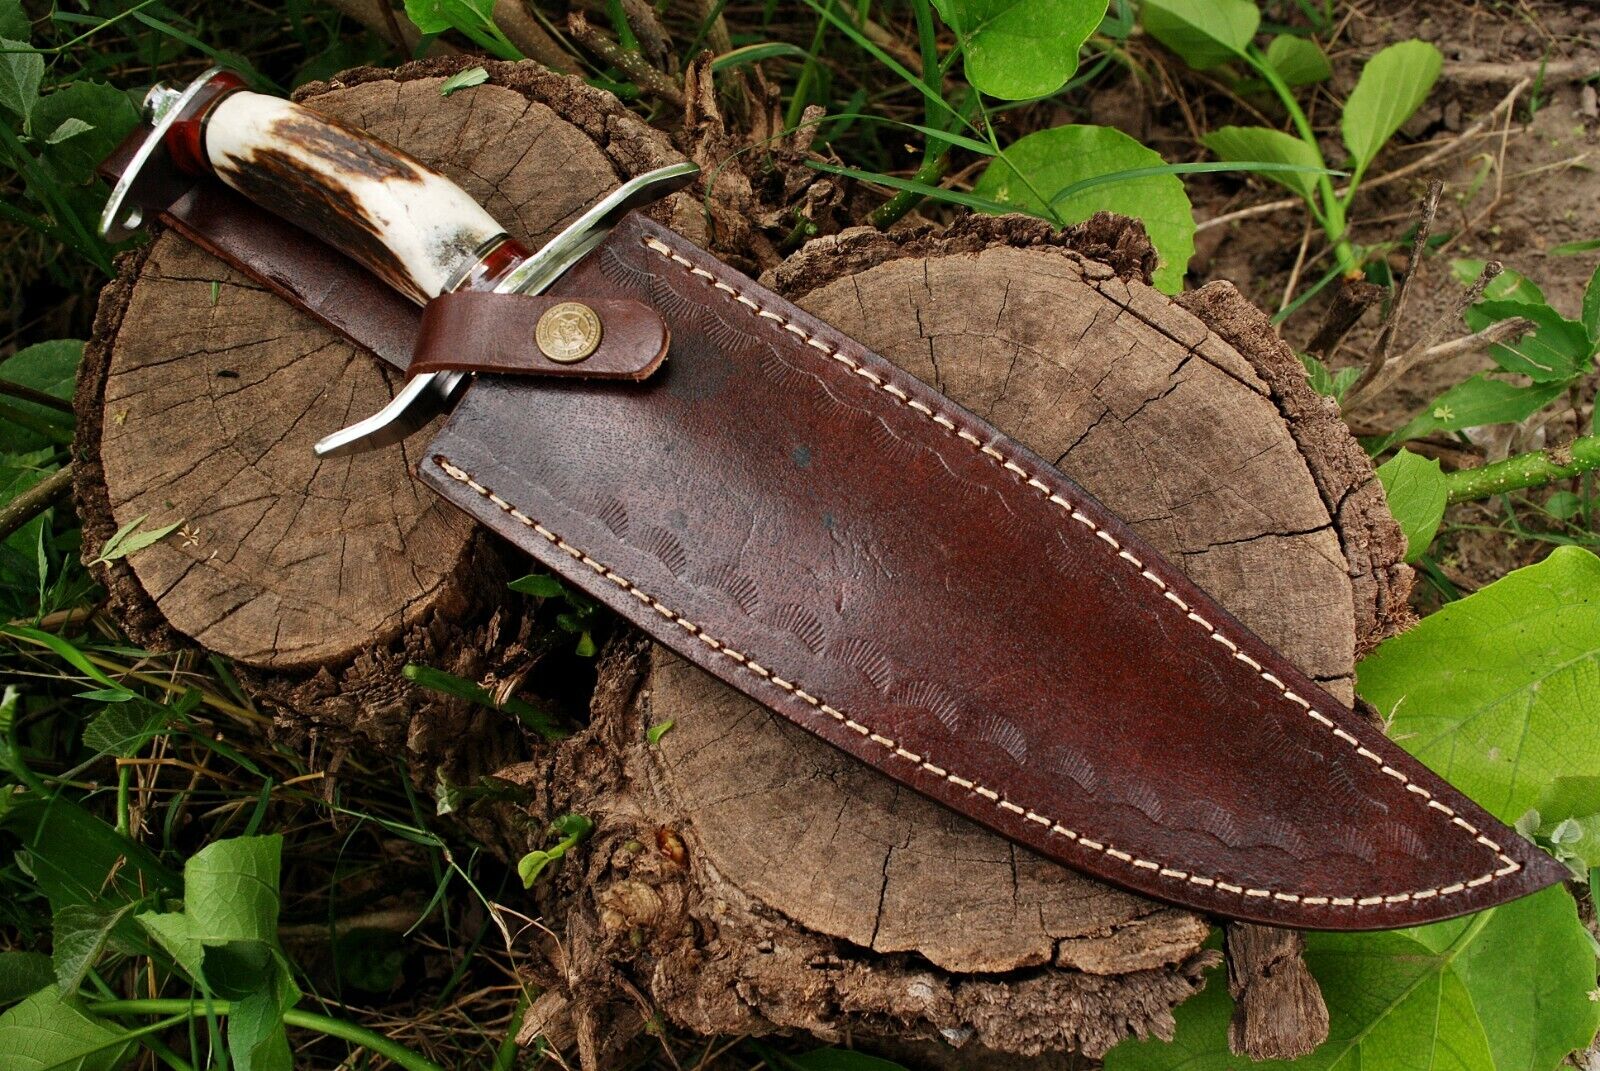 RARE D2 STEEL STAG HANDLE FORGE HUNTING CAMPING SURVIVAL JUNGLE BOWIE KNIFE